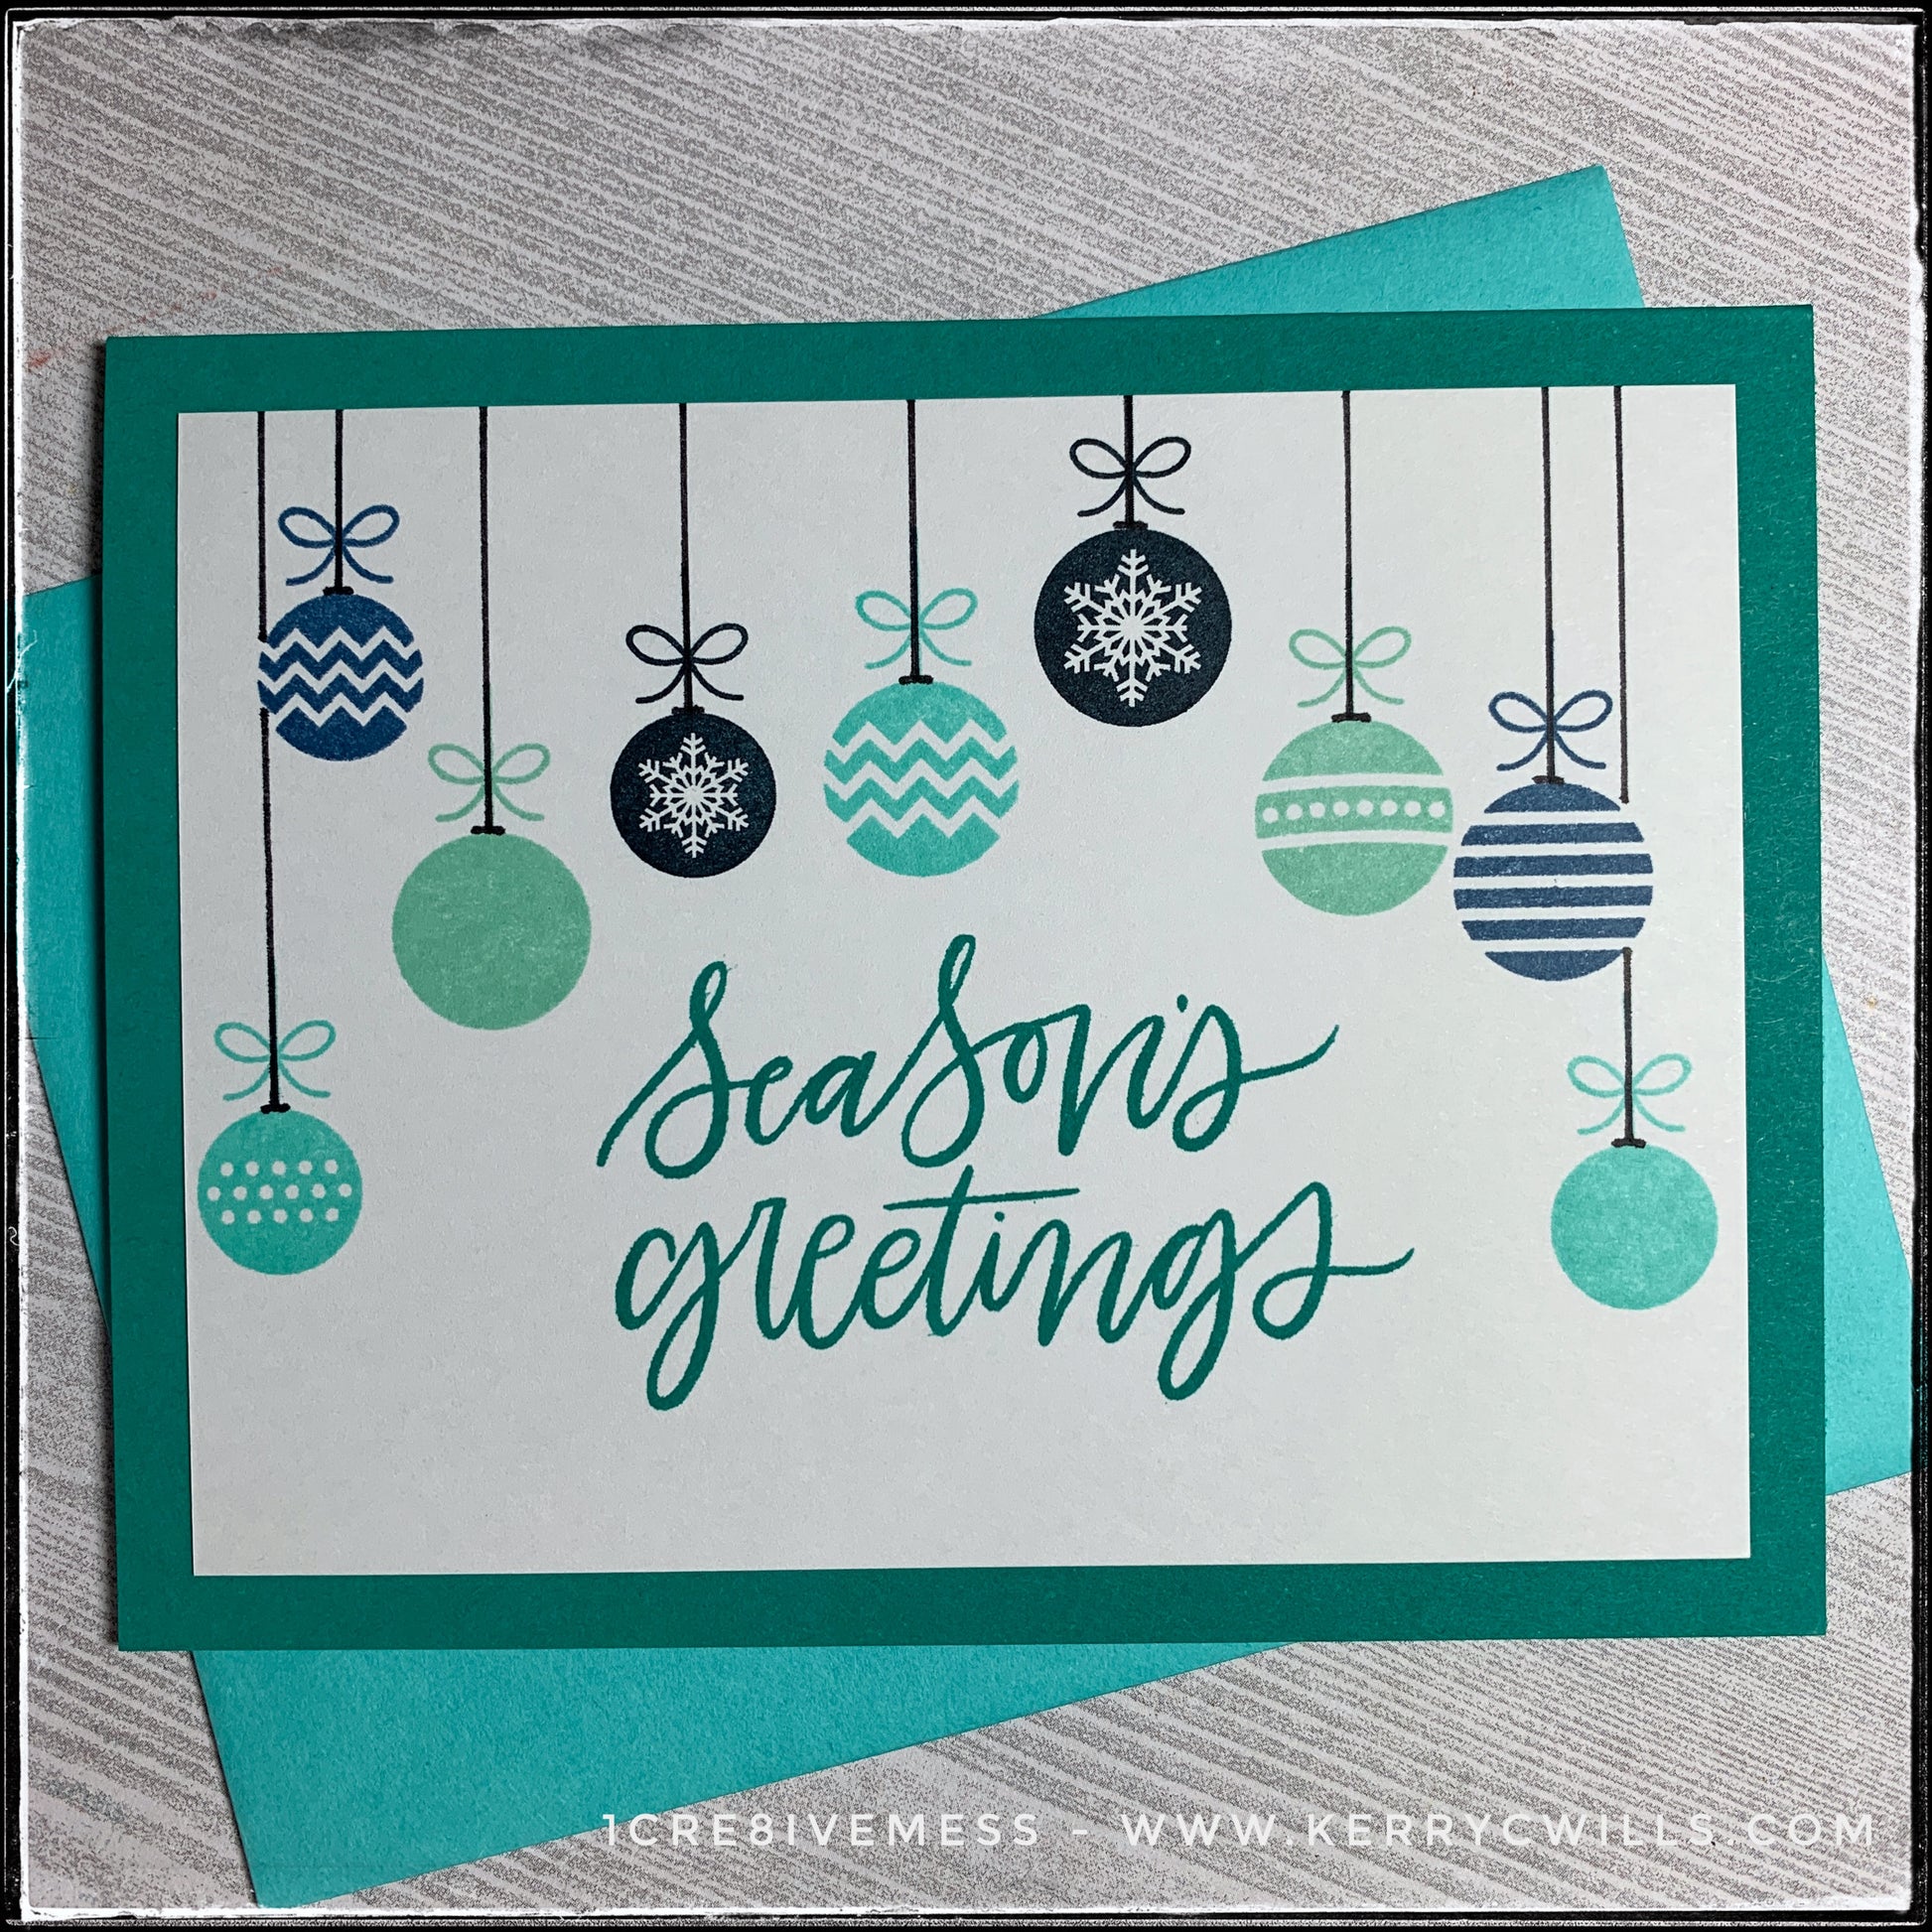 This handmade holiday card features the main sentiment "Season's greetings" which is stamped in a dark turquoise color, coordinating with the card base. A variety of patterned ornaments hang from the top of the panel, surrounding the sentiment. The ornaments are stamped in shades of aqua, turquoise and navy blues, while hand drawn black strings reach to the top of the card panel as if they are really hanging. A turquoise envelope is included and layered beneath the card. 